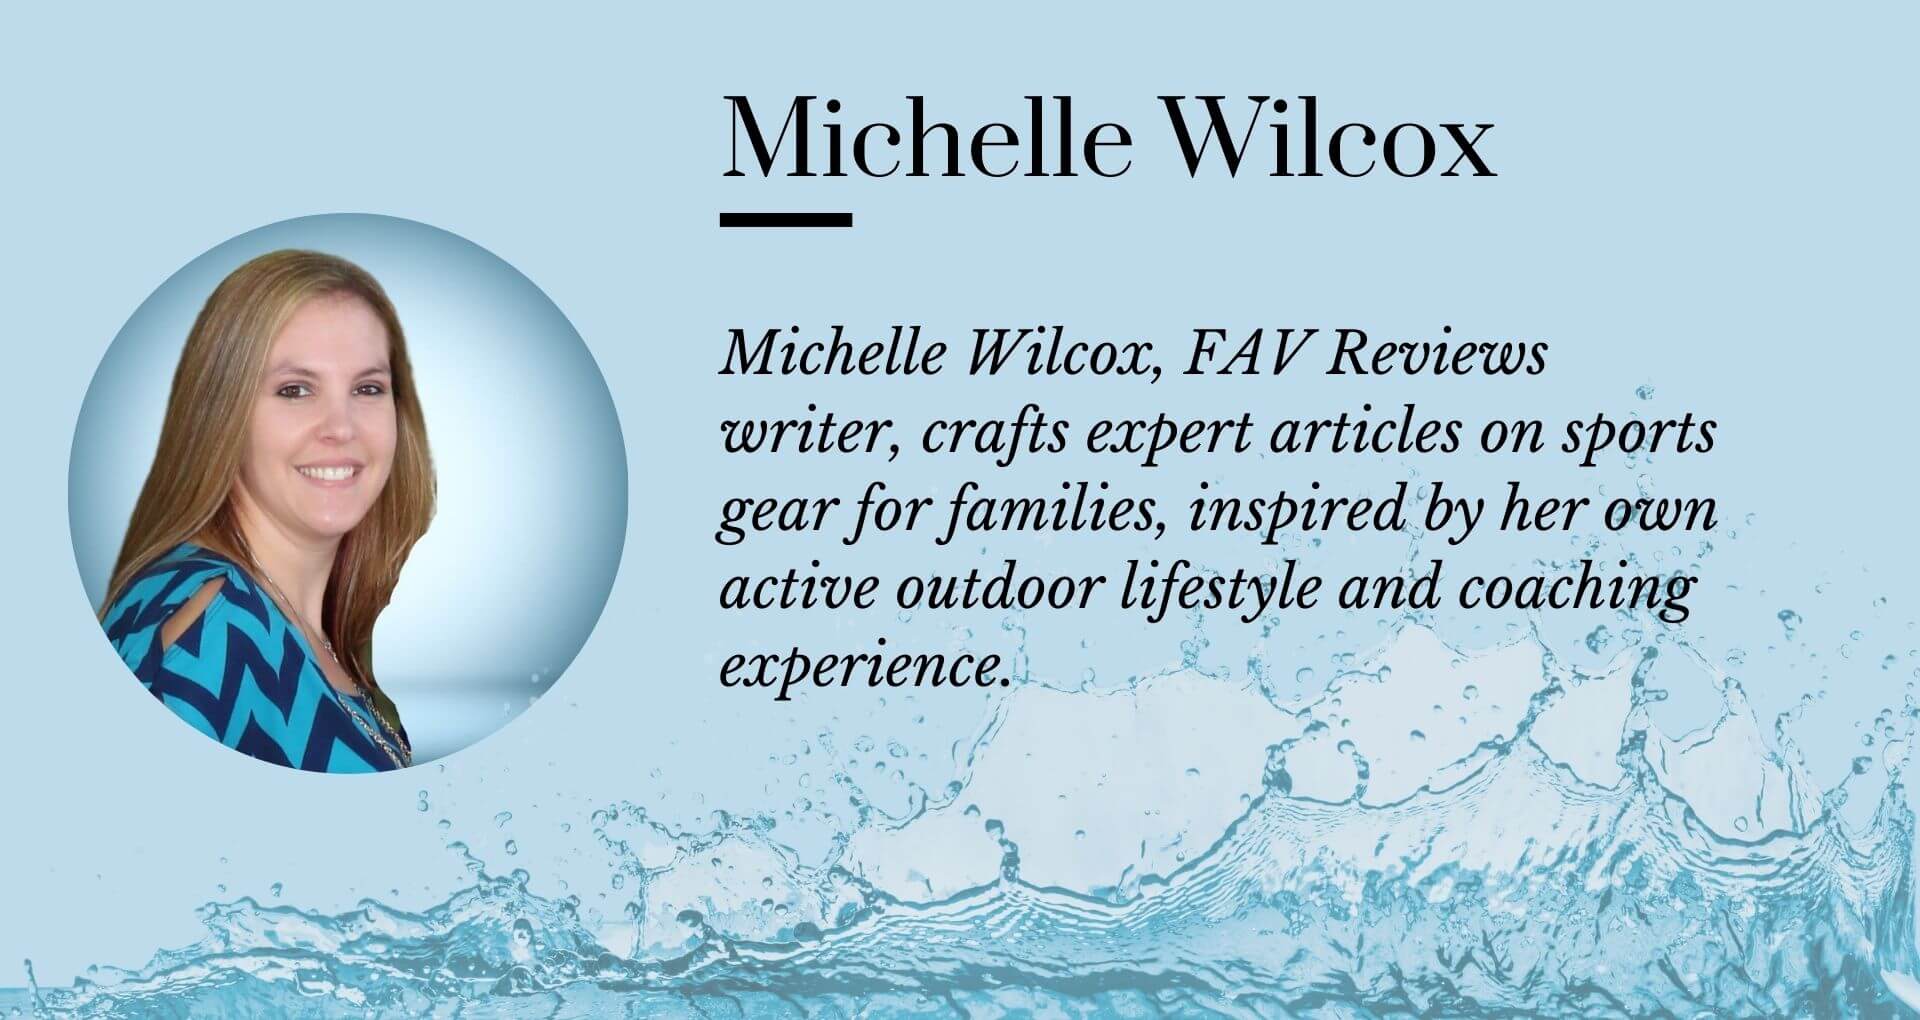 Michelle Wilcox, Writer and Researcher for FAV Reviews